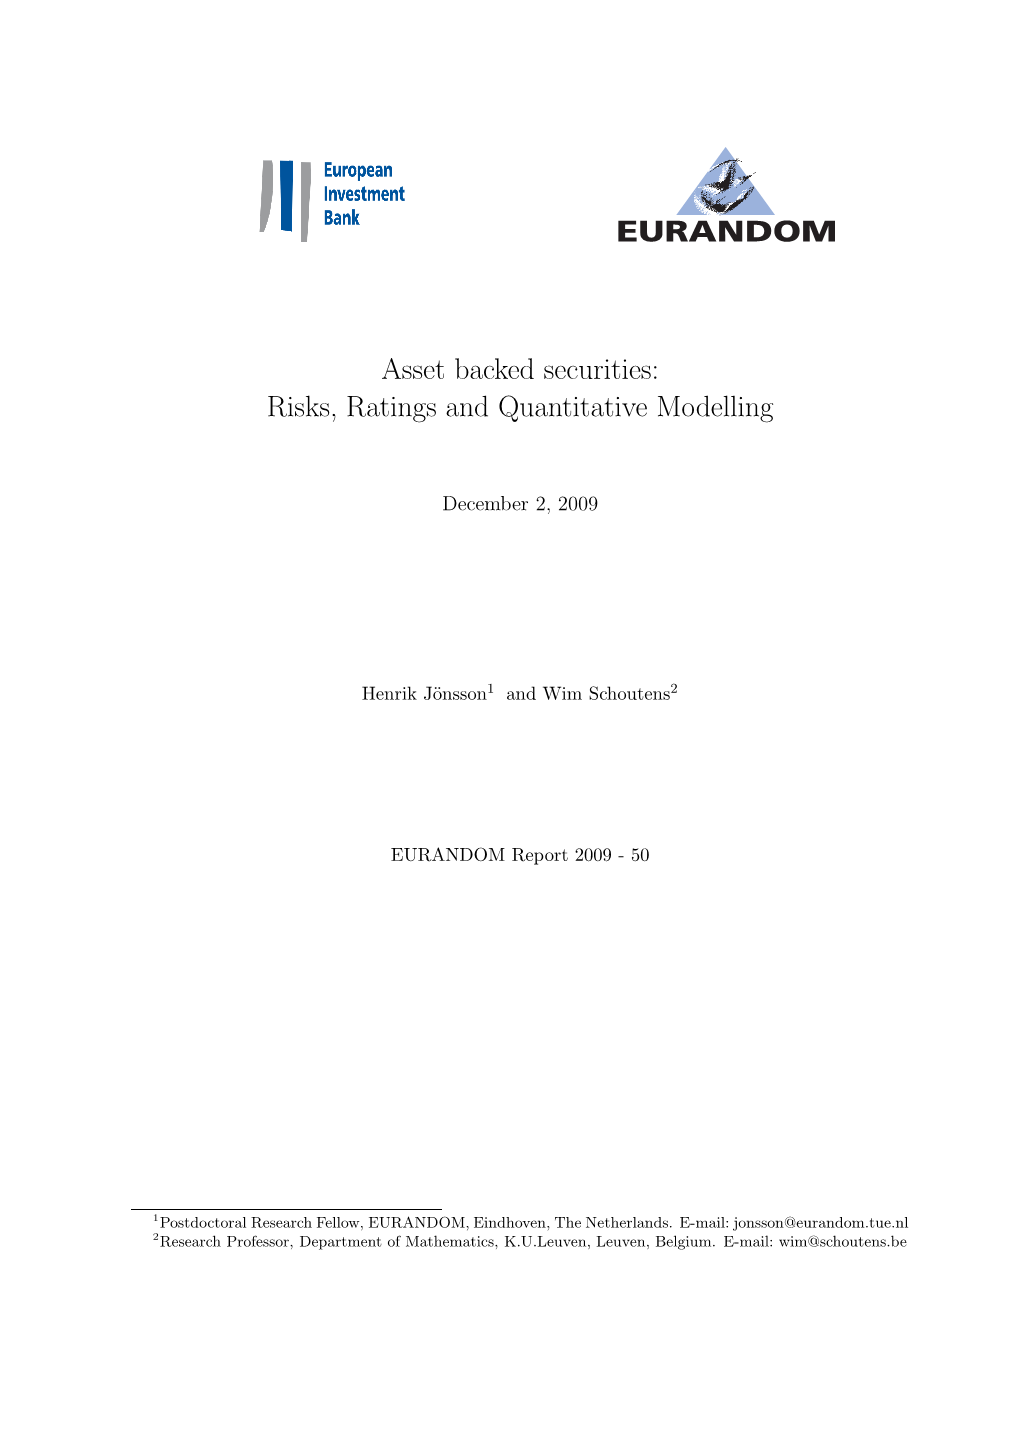 Asset Backed Securities: Risks, Ratings and Quantitative Modelling